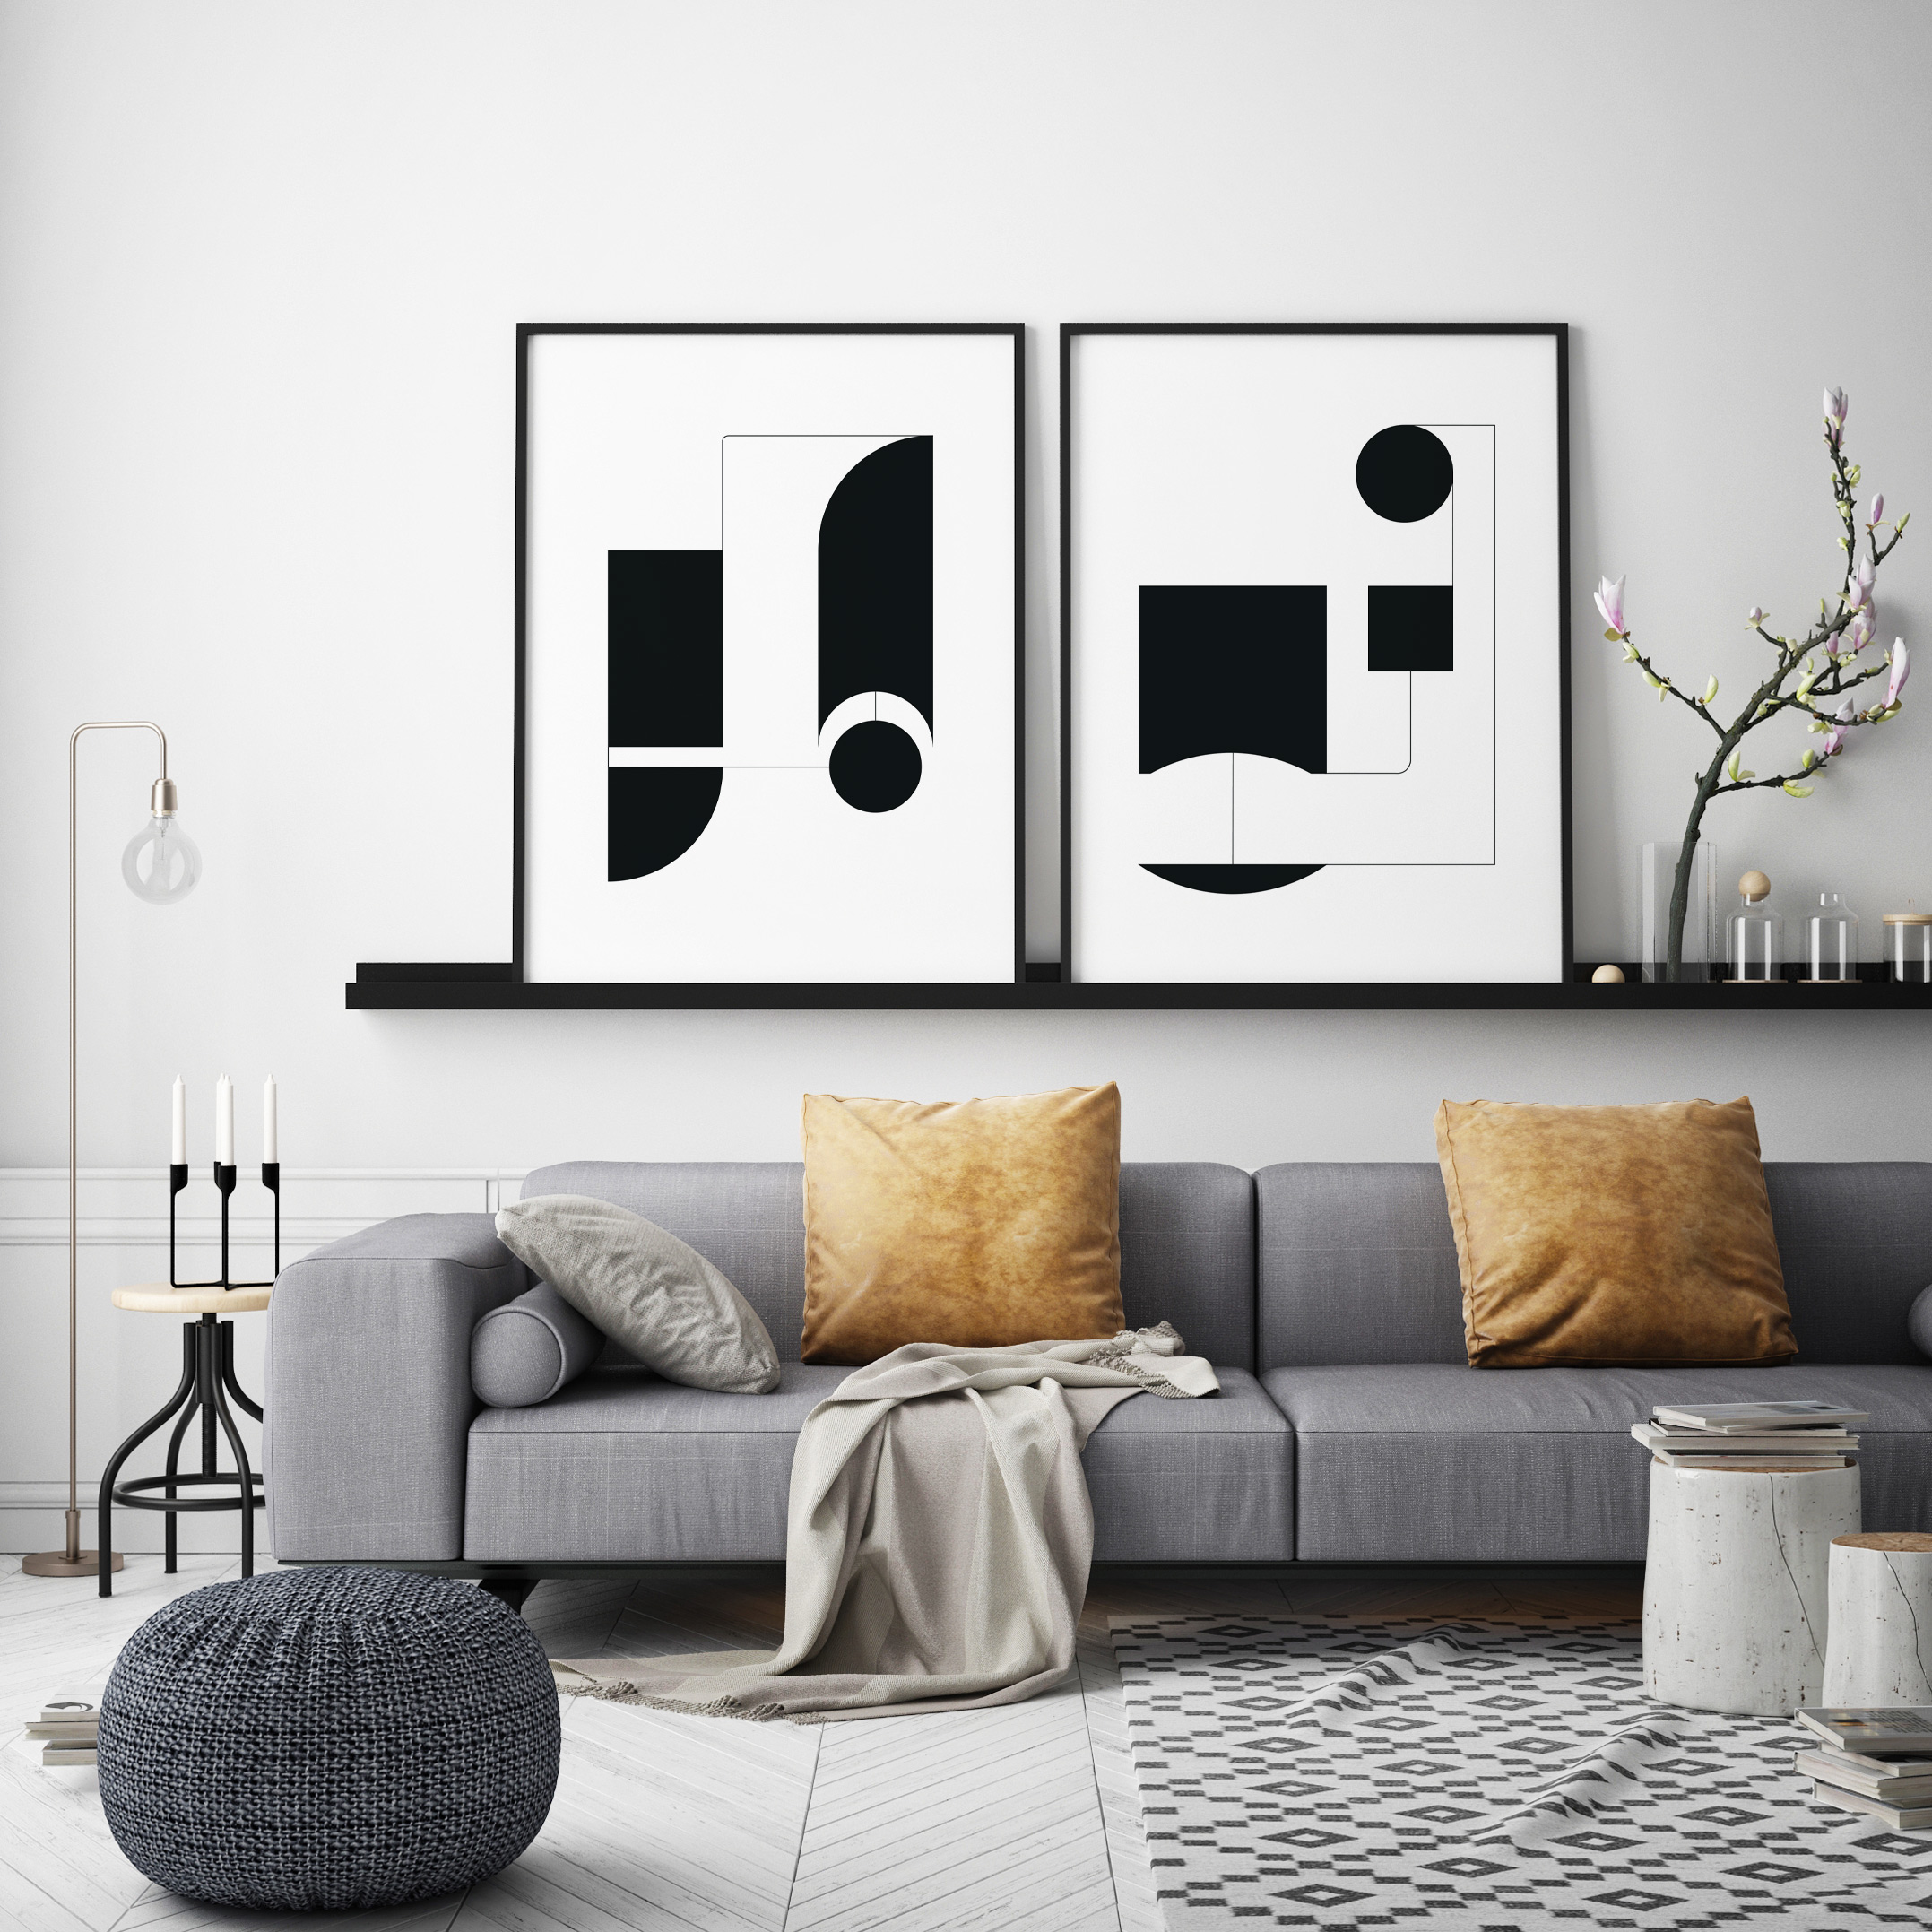 TERESA VAN // STRUCTURED SHAPES M10 - HAND PAINTED PICTURES | BLACK + WHITE